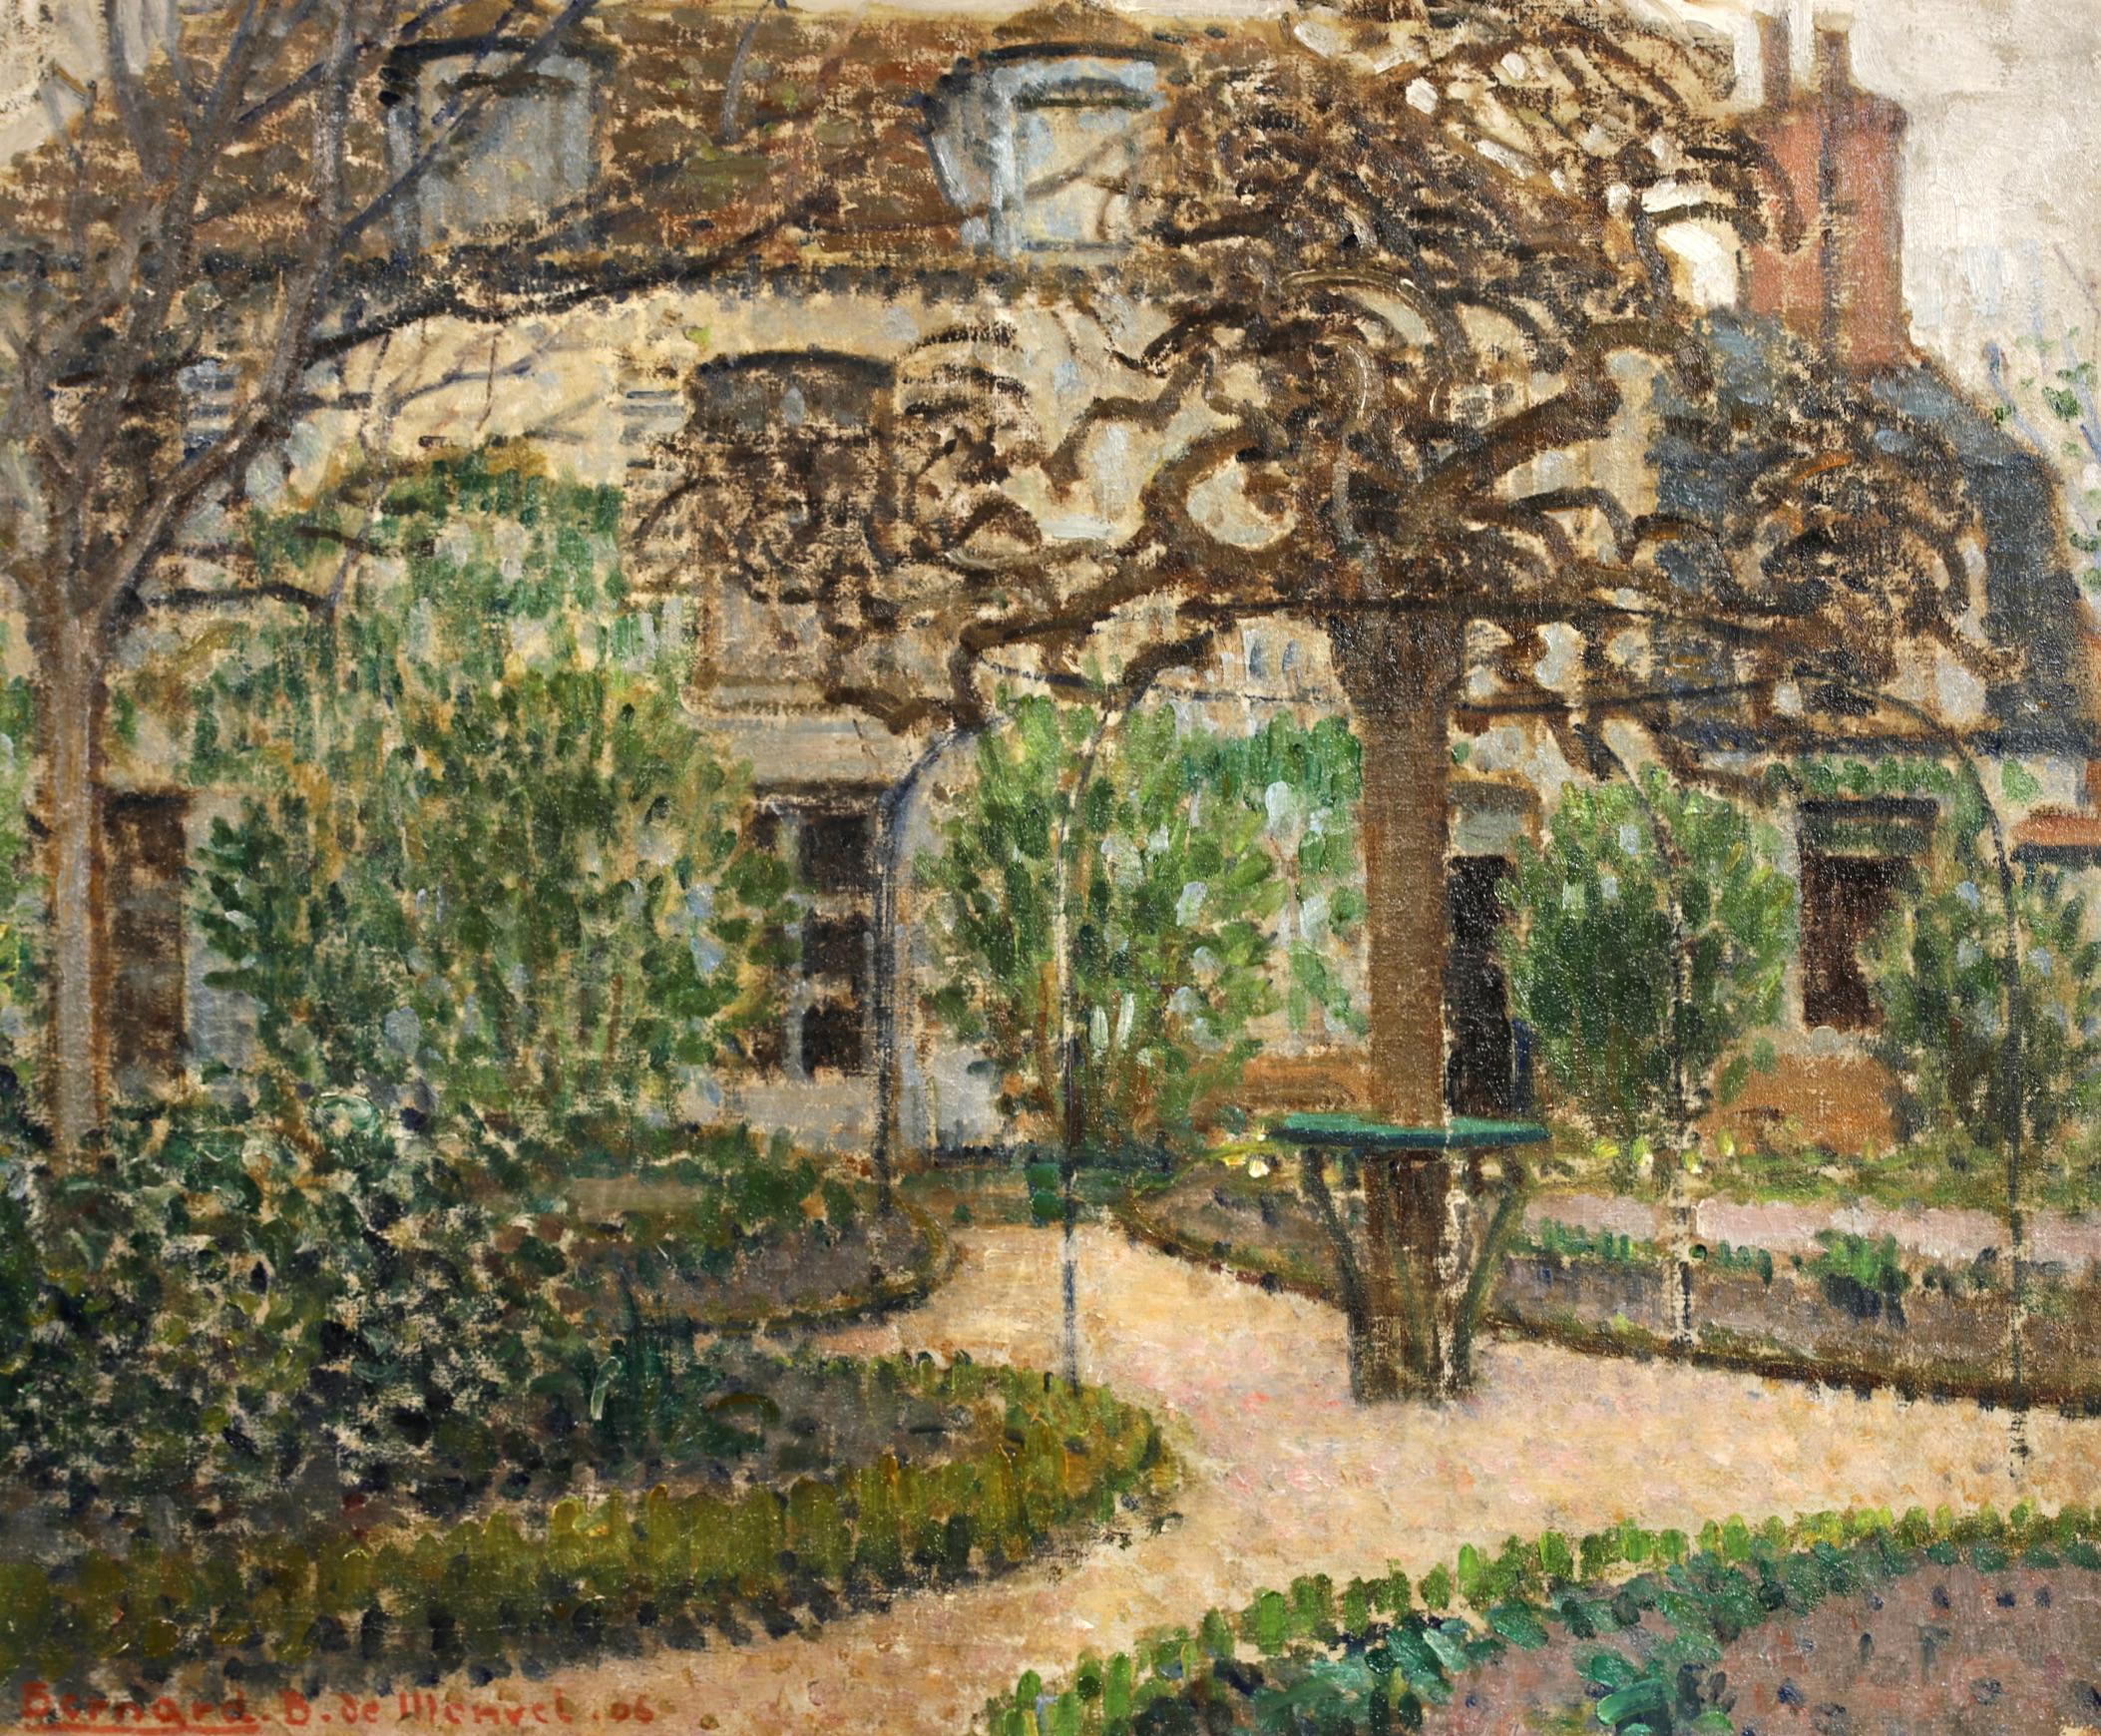 Signed and dated impressionist oil on canvas landscape by French painter, engraver, sculptor and fashion illustrator Bernard Boutet de Monvel. The work depicts a view of the artist's garden in Nemours, France. The house is concealed by two large,